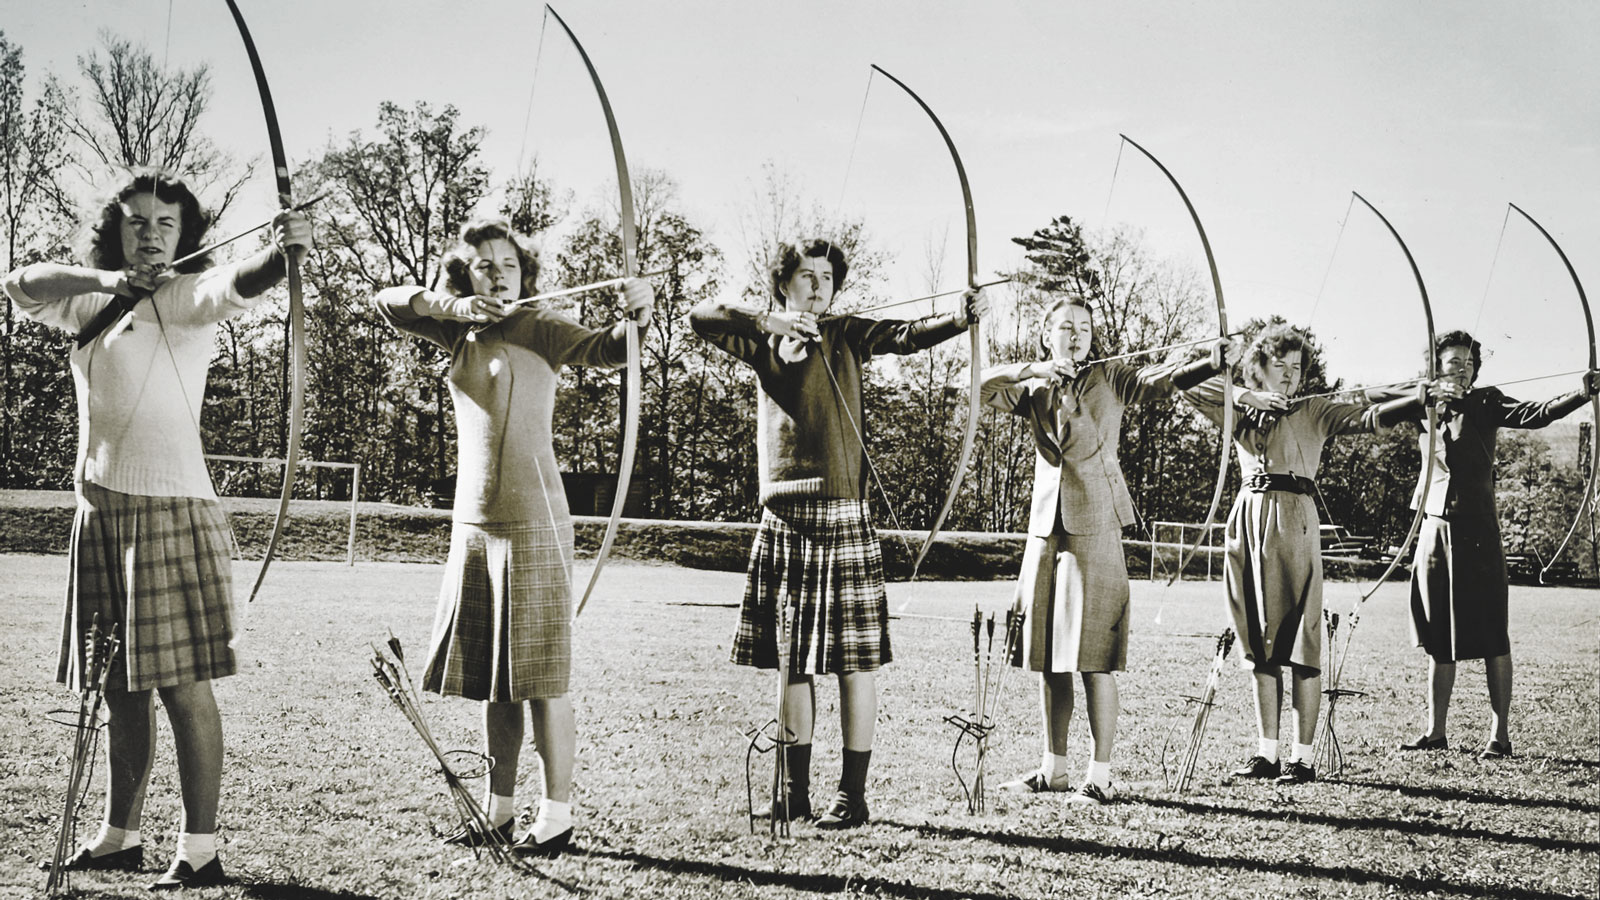 A line of women aim their bows and arrows during an archery class in 1947